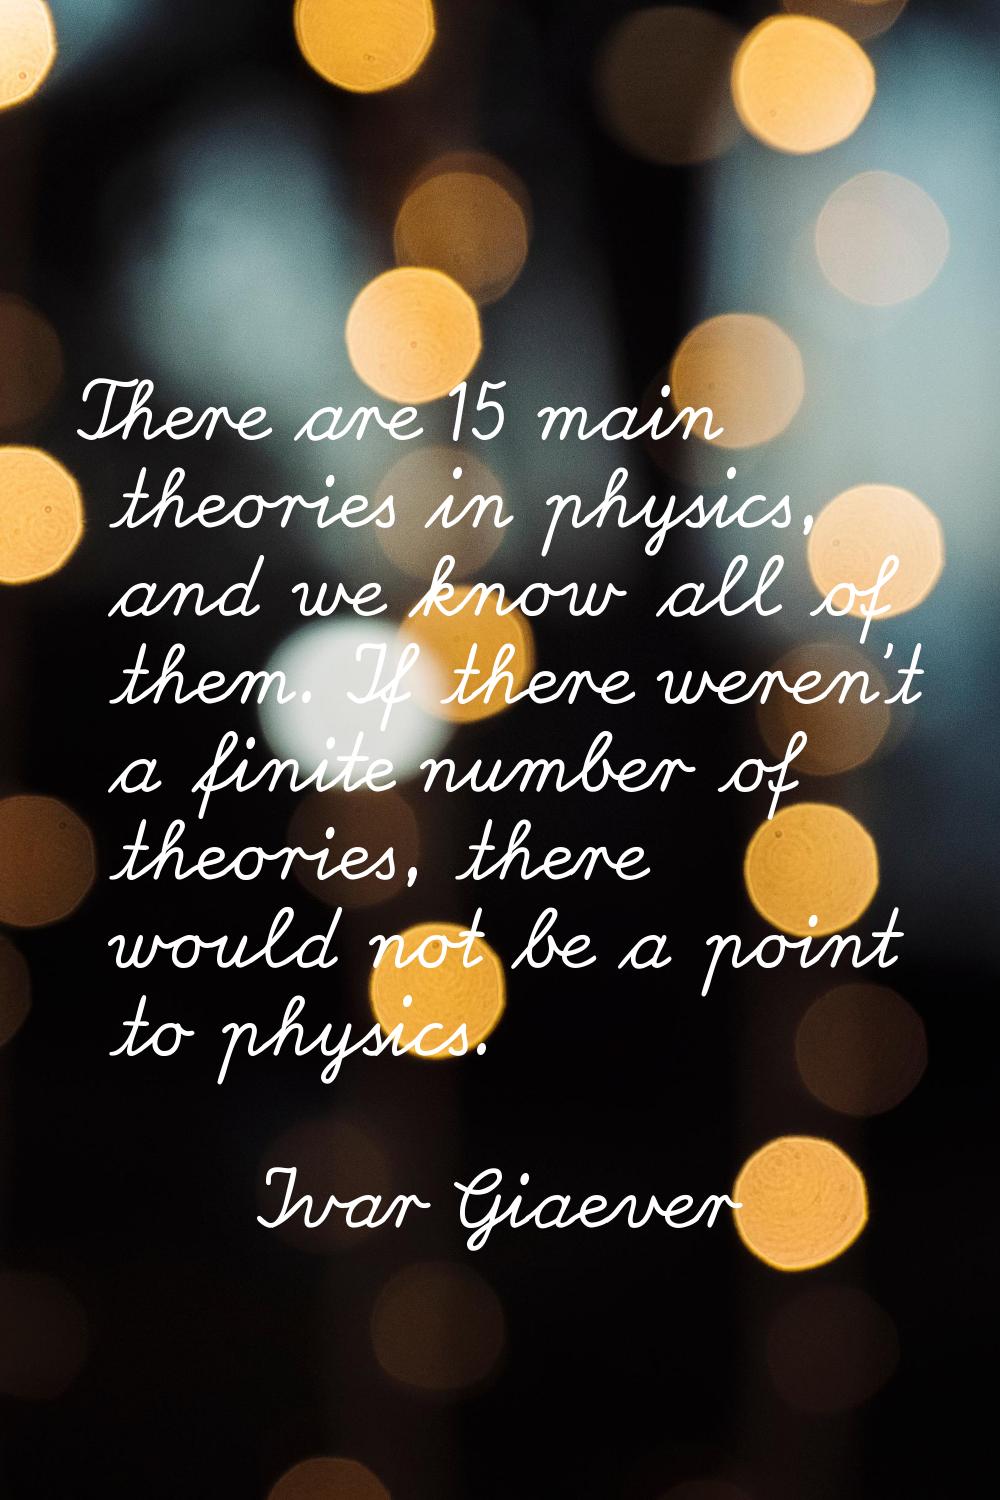 There are 15 main theories in physics, and we know all of them. If there weren't a finite number of